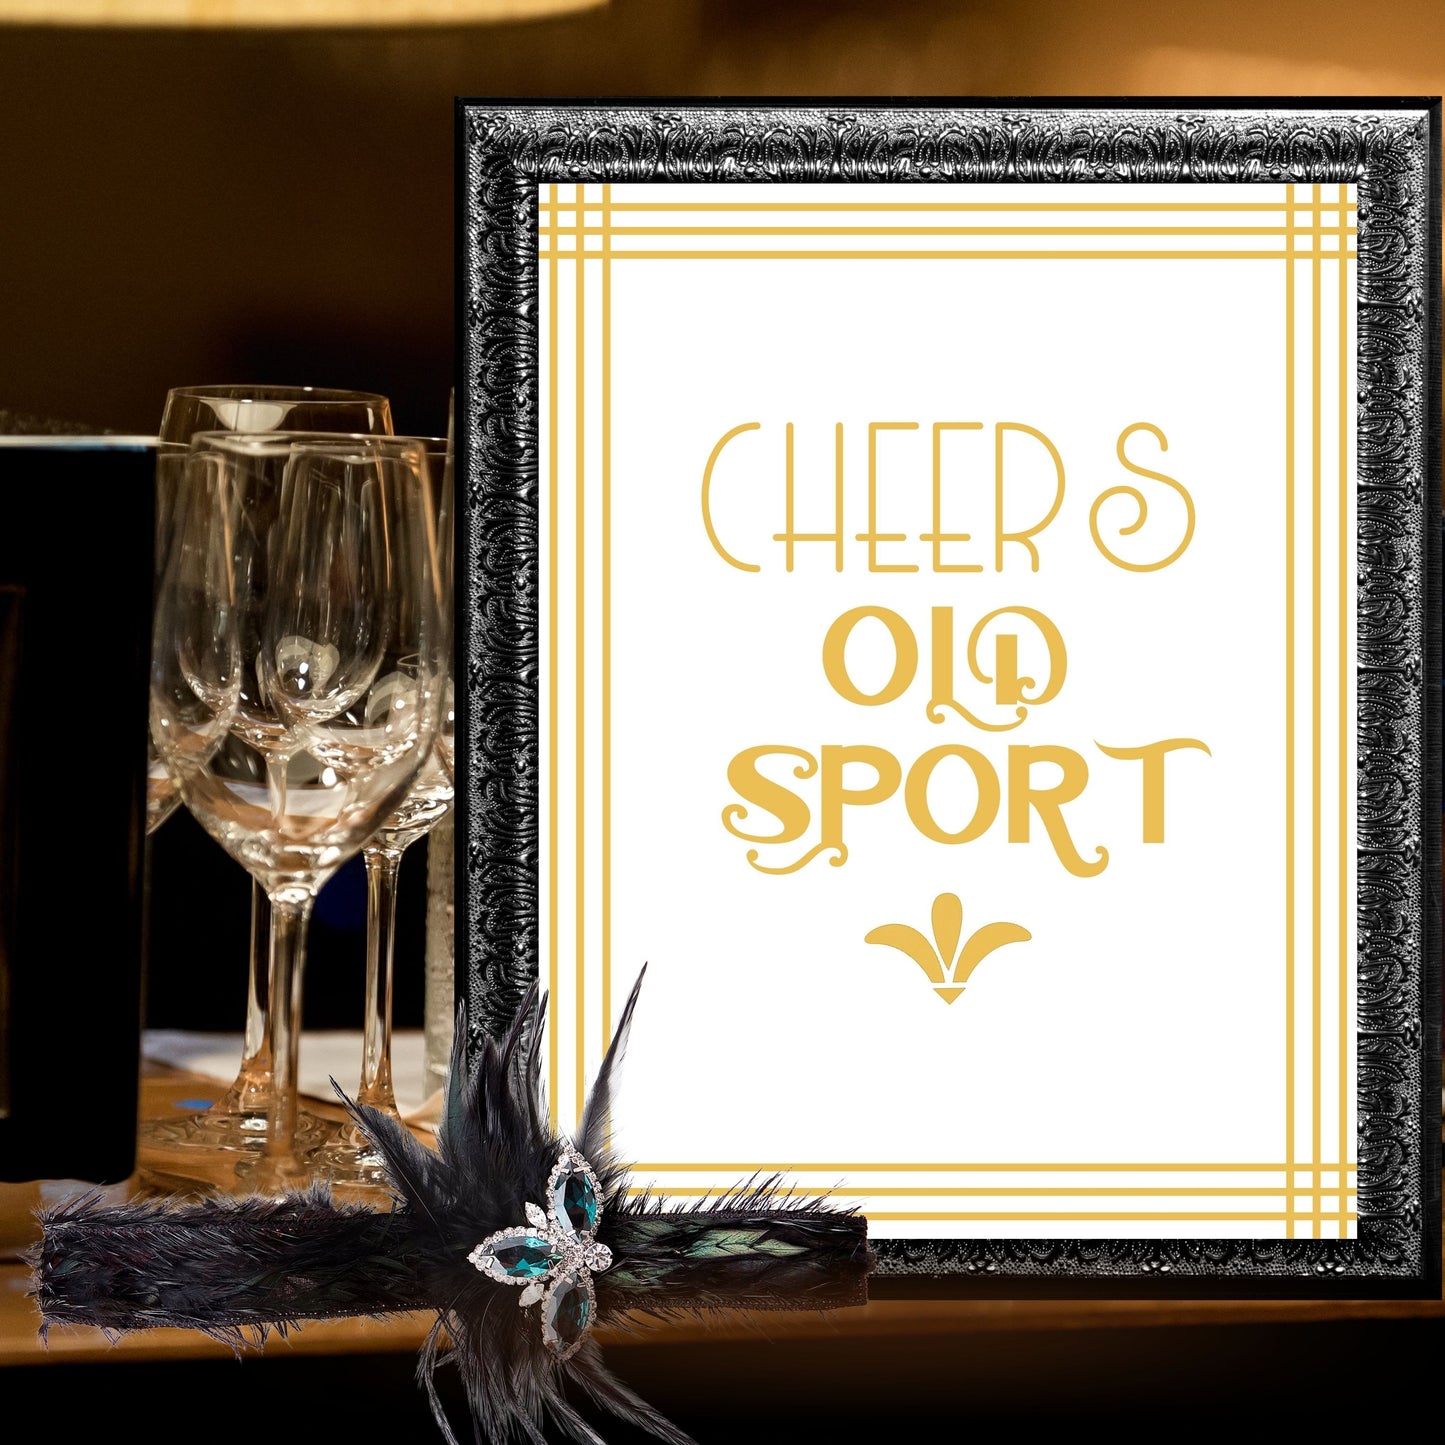 "Cheers Old Sport" Printable Party Sign For Great Gatsby or Roaring 20's Party Or Wedding, White & Gold, Printable Party Decor